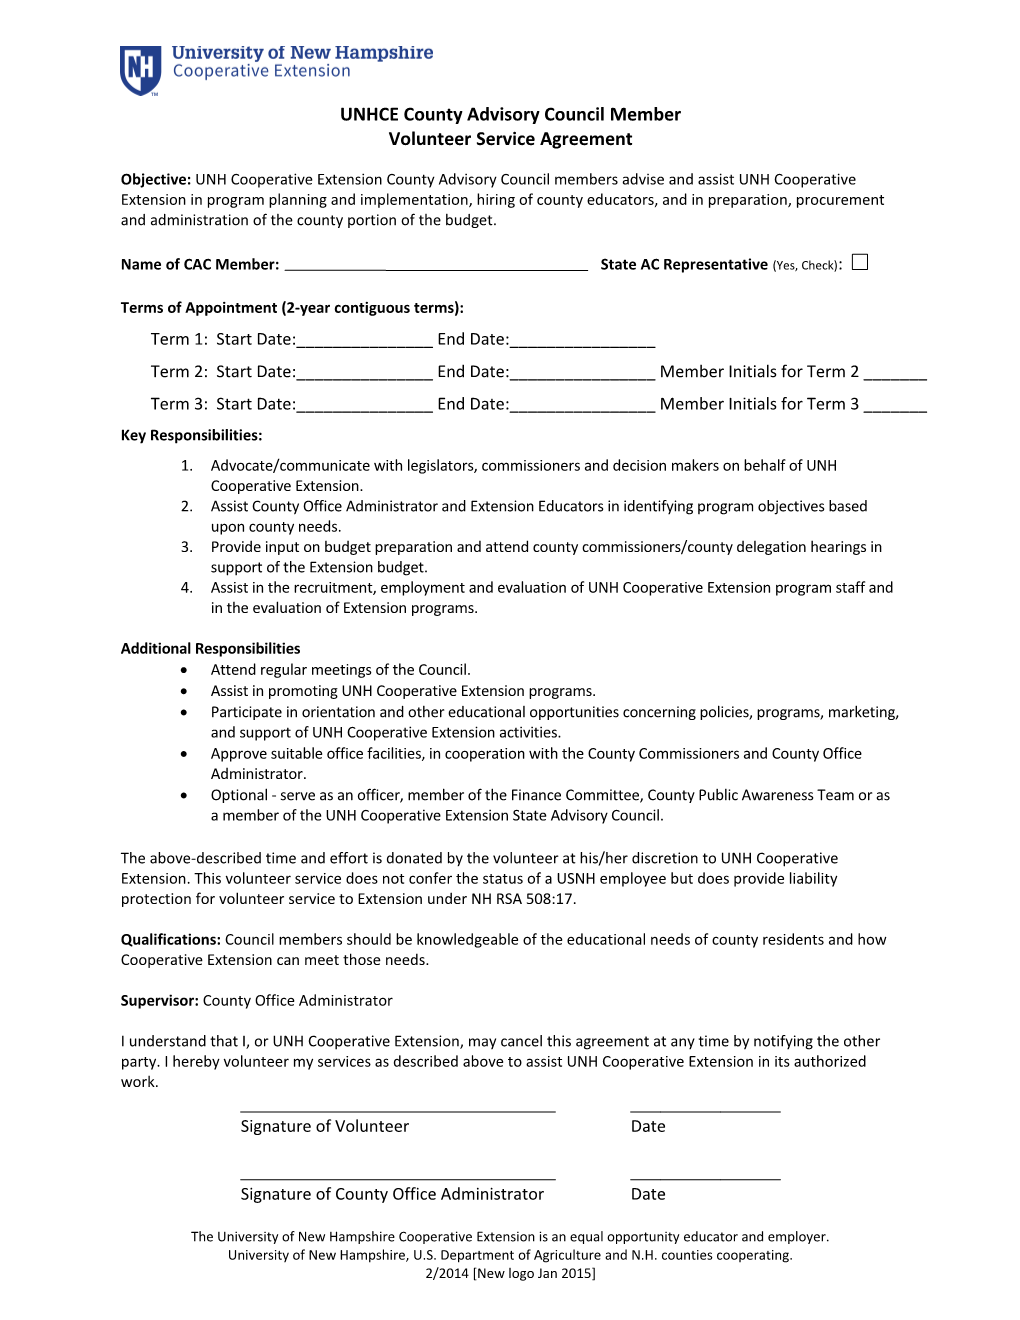 UNHCE County Advisory Council Member Agreement